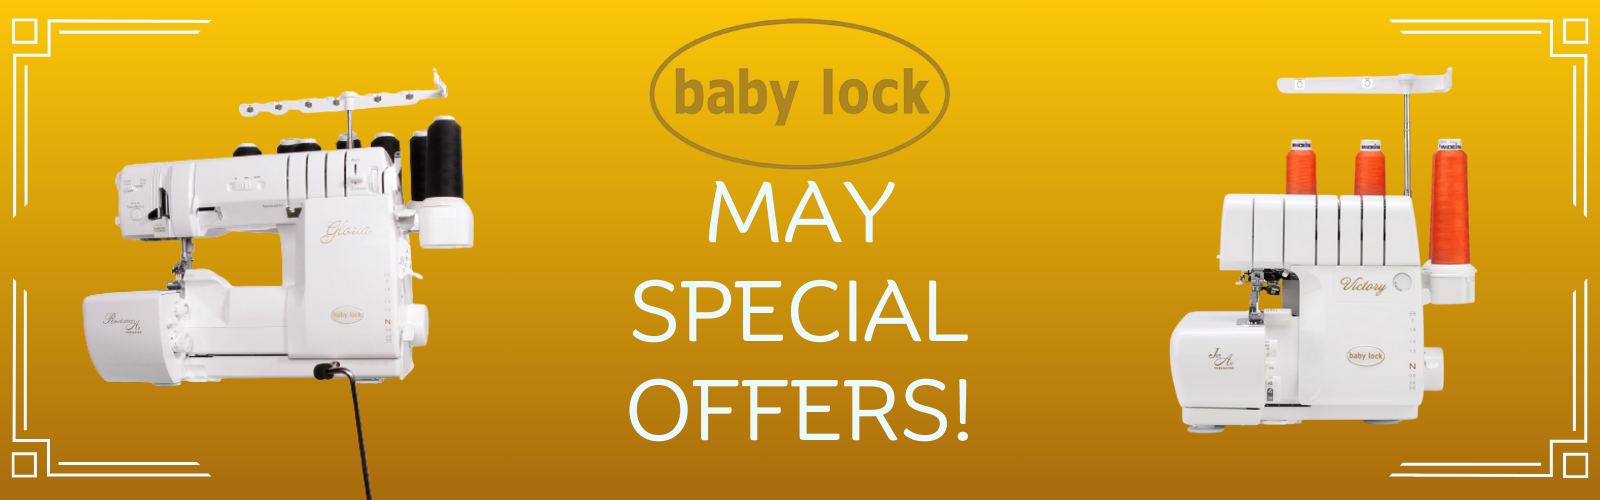 Baby Lock May Special Offers - Sewing Direct